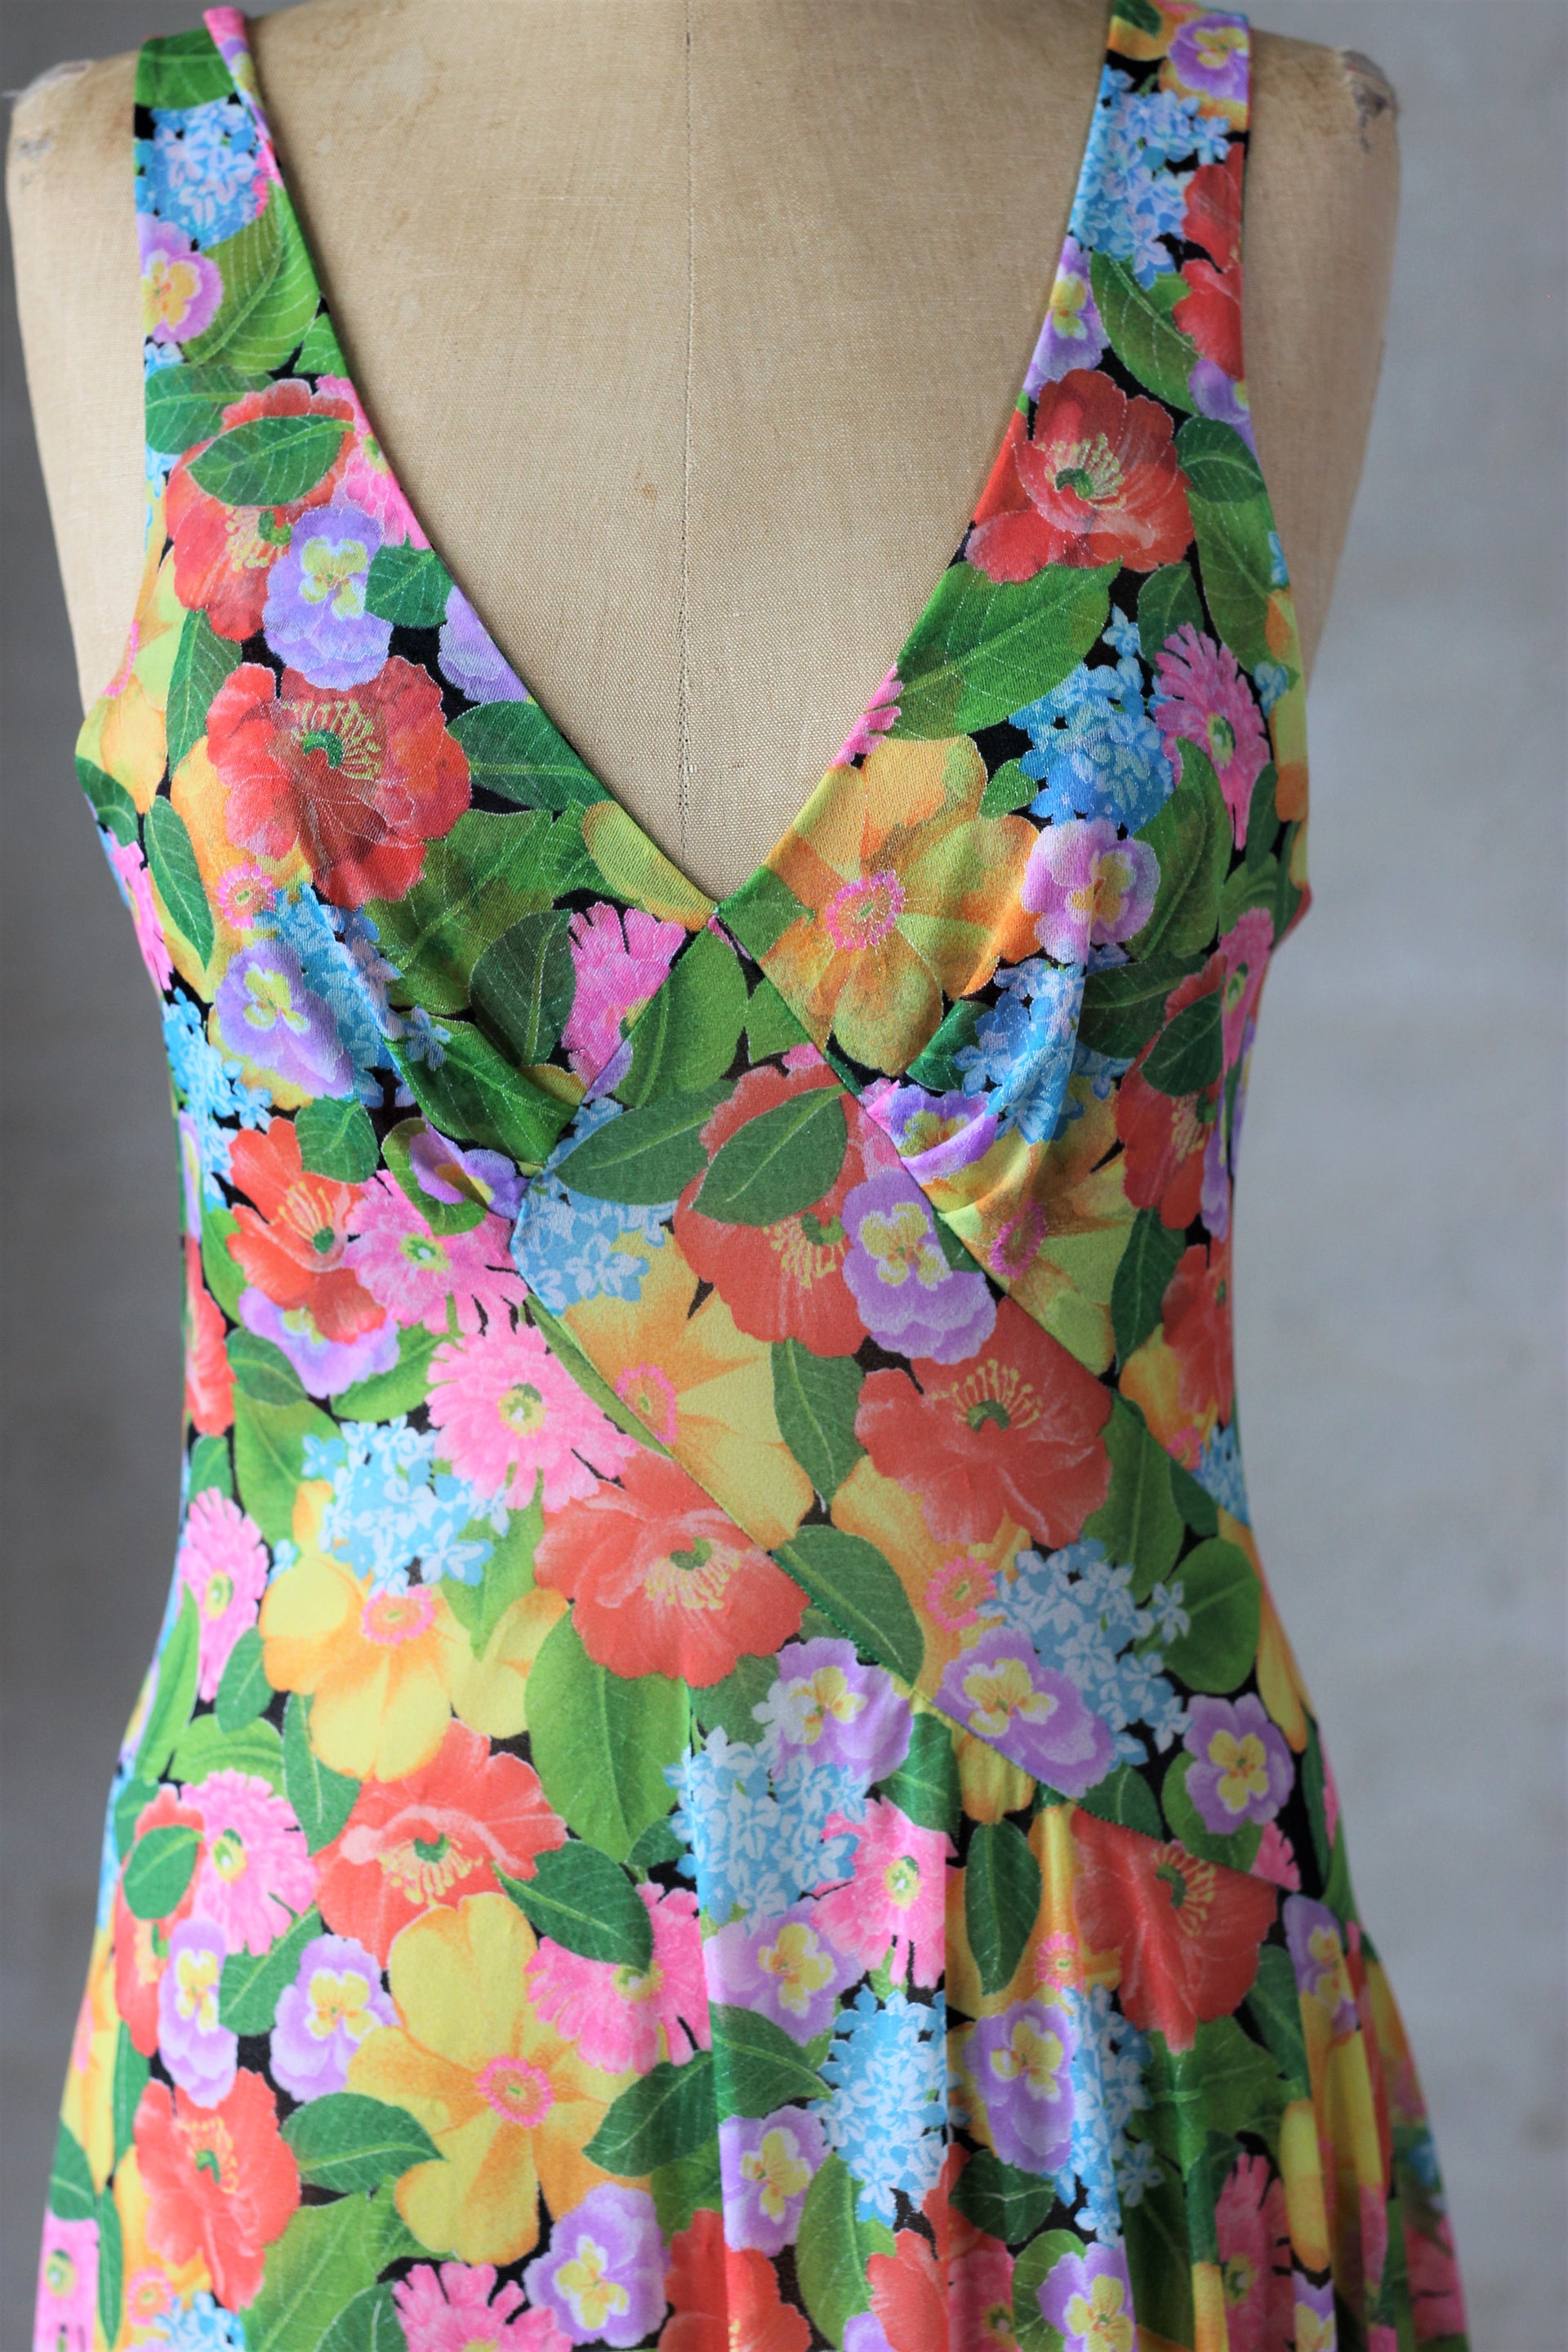 1990s Colorful Sheer Maxi Dress With Flowers//Size S/M            D5